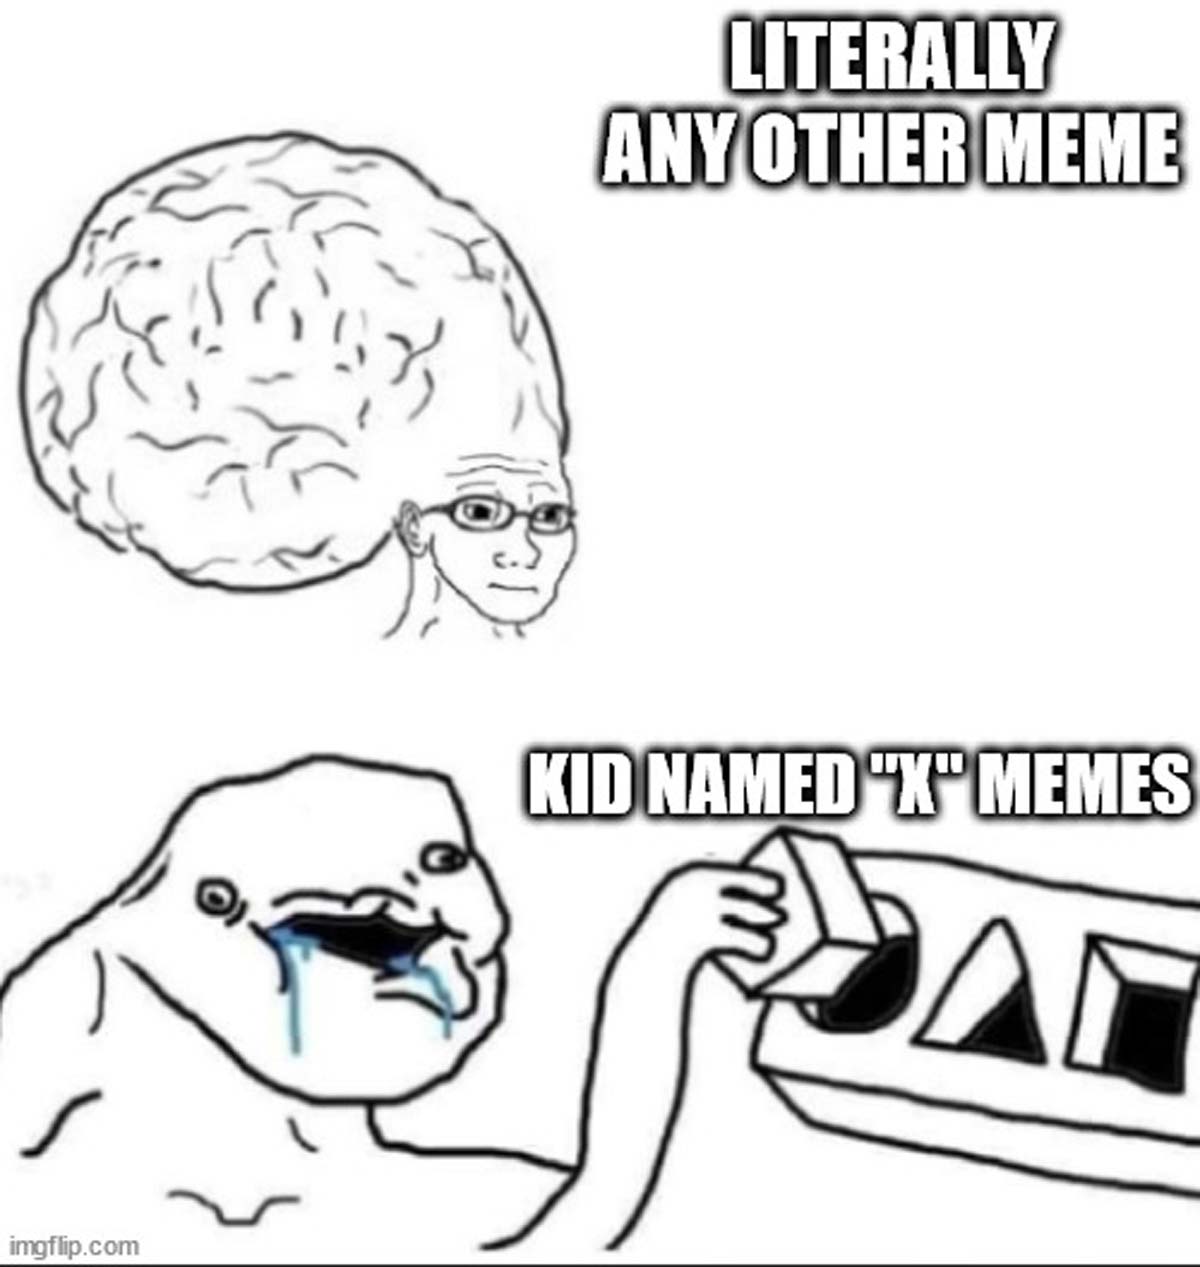 game is so hard meme - imgflip.com Literally Any Other Meme Kid Named "X" Memes A